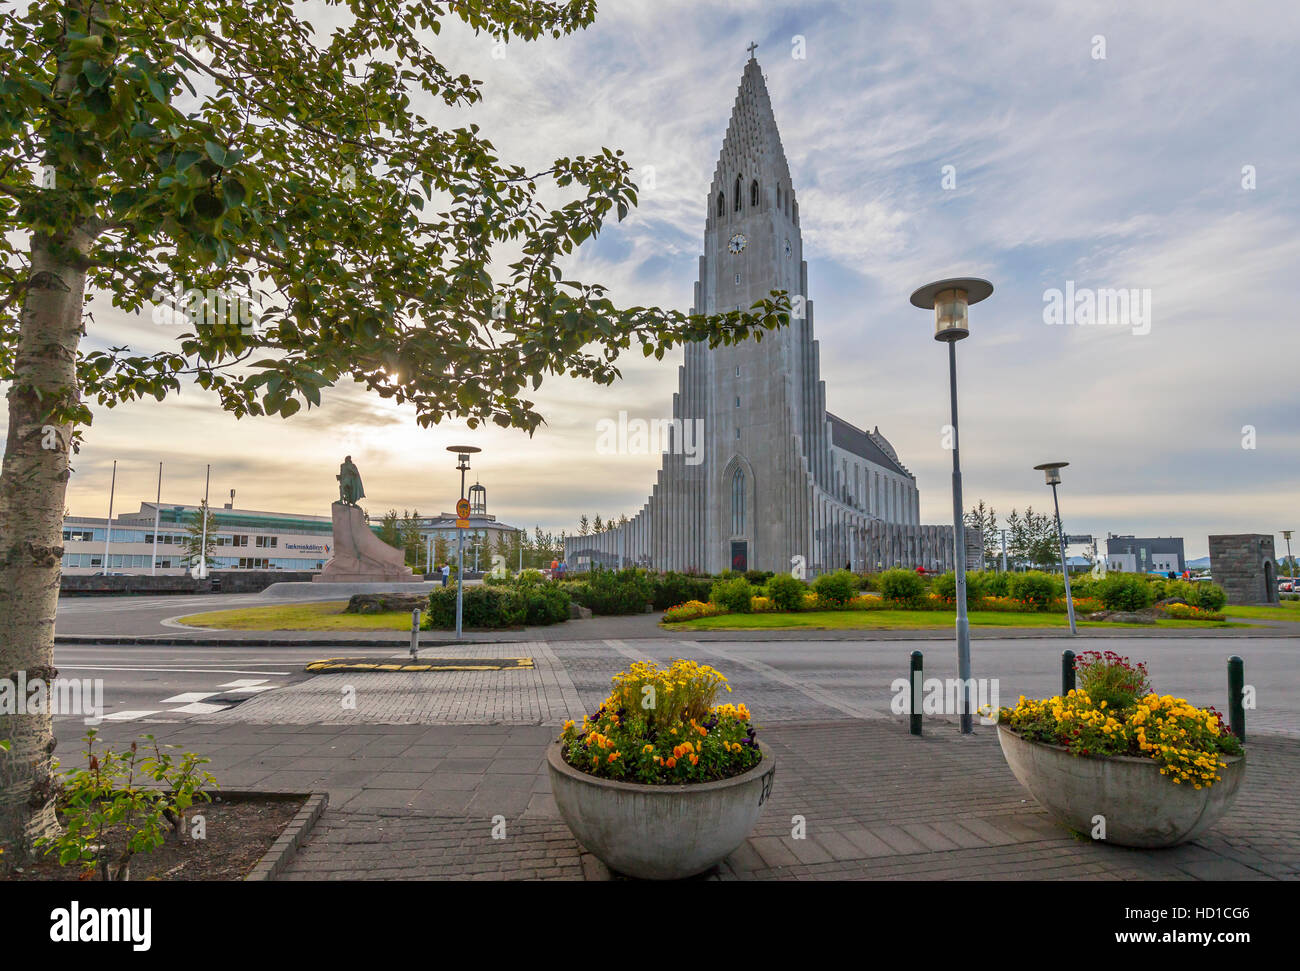 Early Morning  view of people, tourists and the Hallgrimskirkja Lutheran Church in Reykjavik, Iceland. Stock Photo